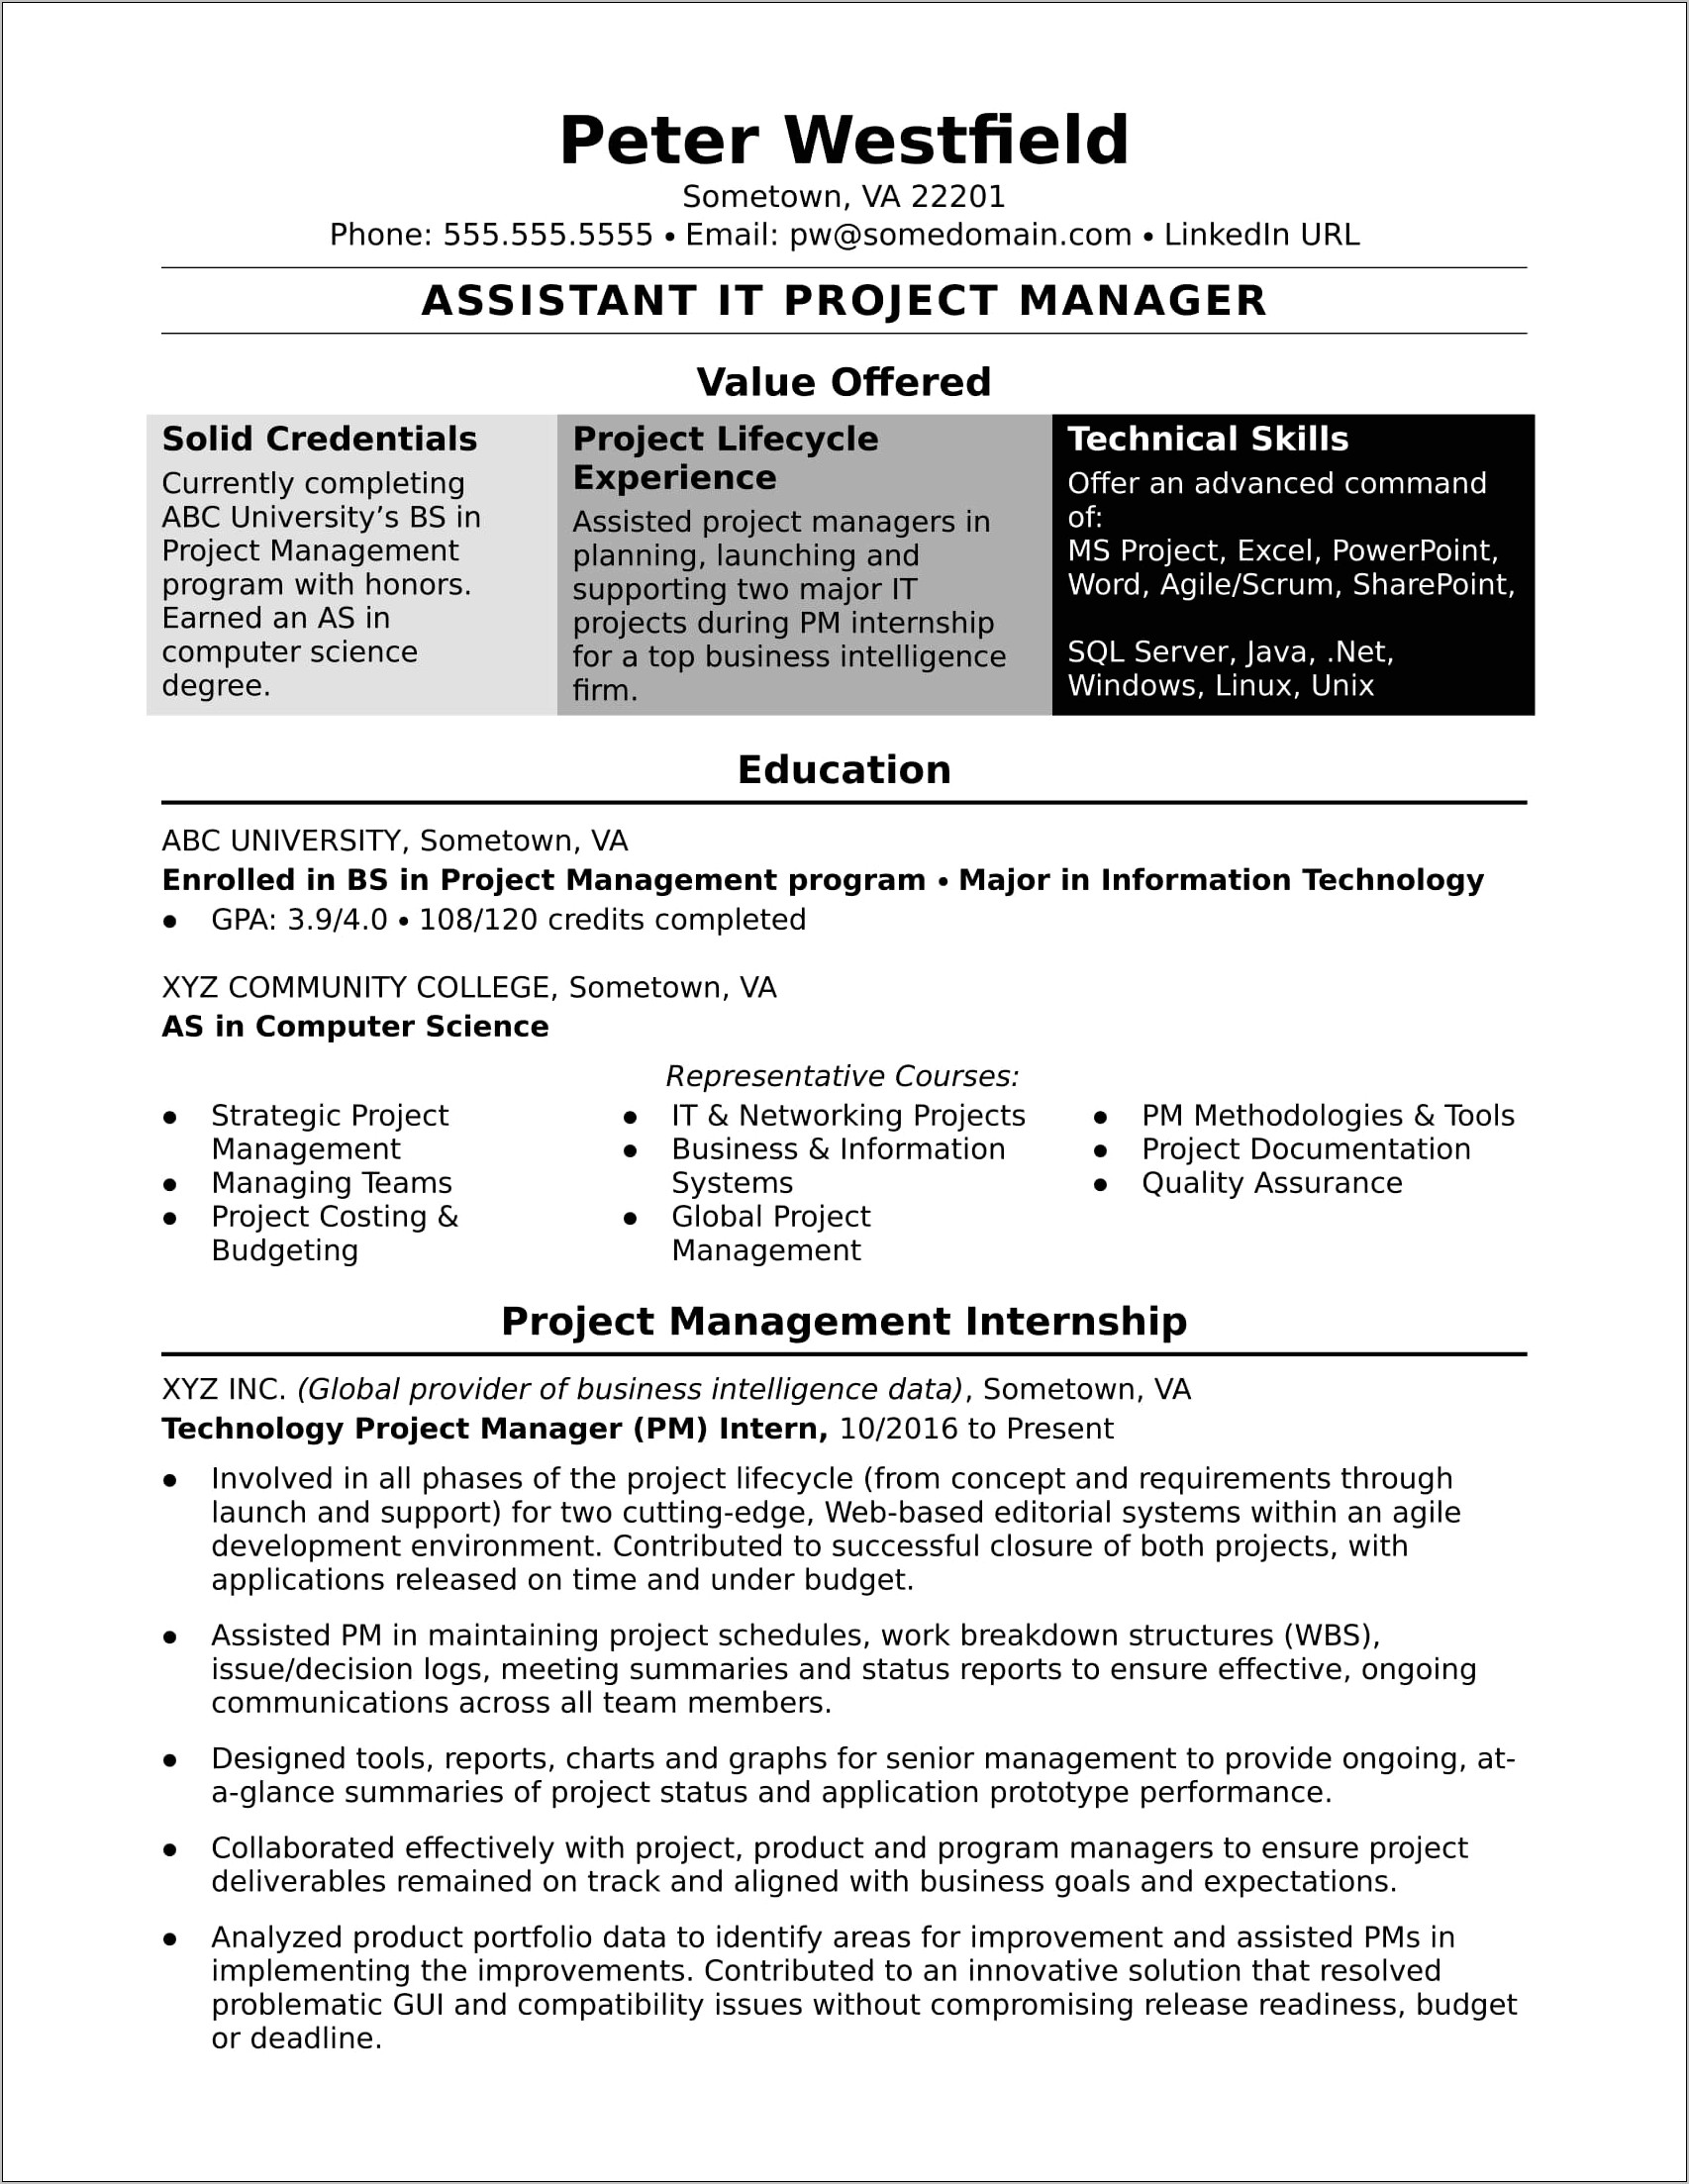 Assistant Constrcuction Manager Resume Keyword